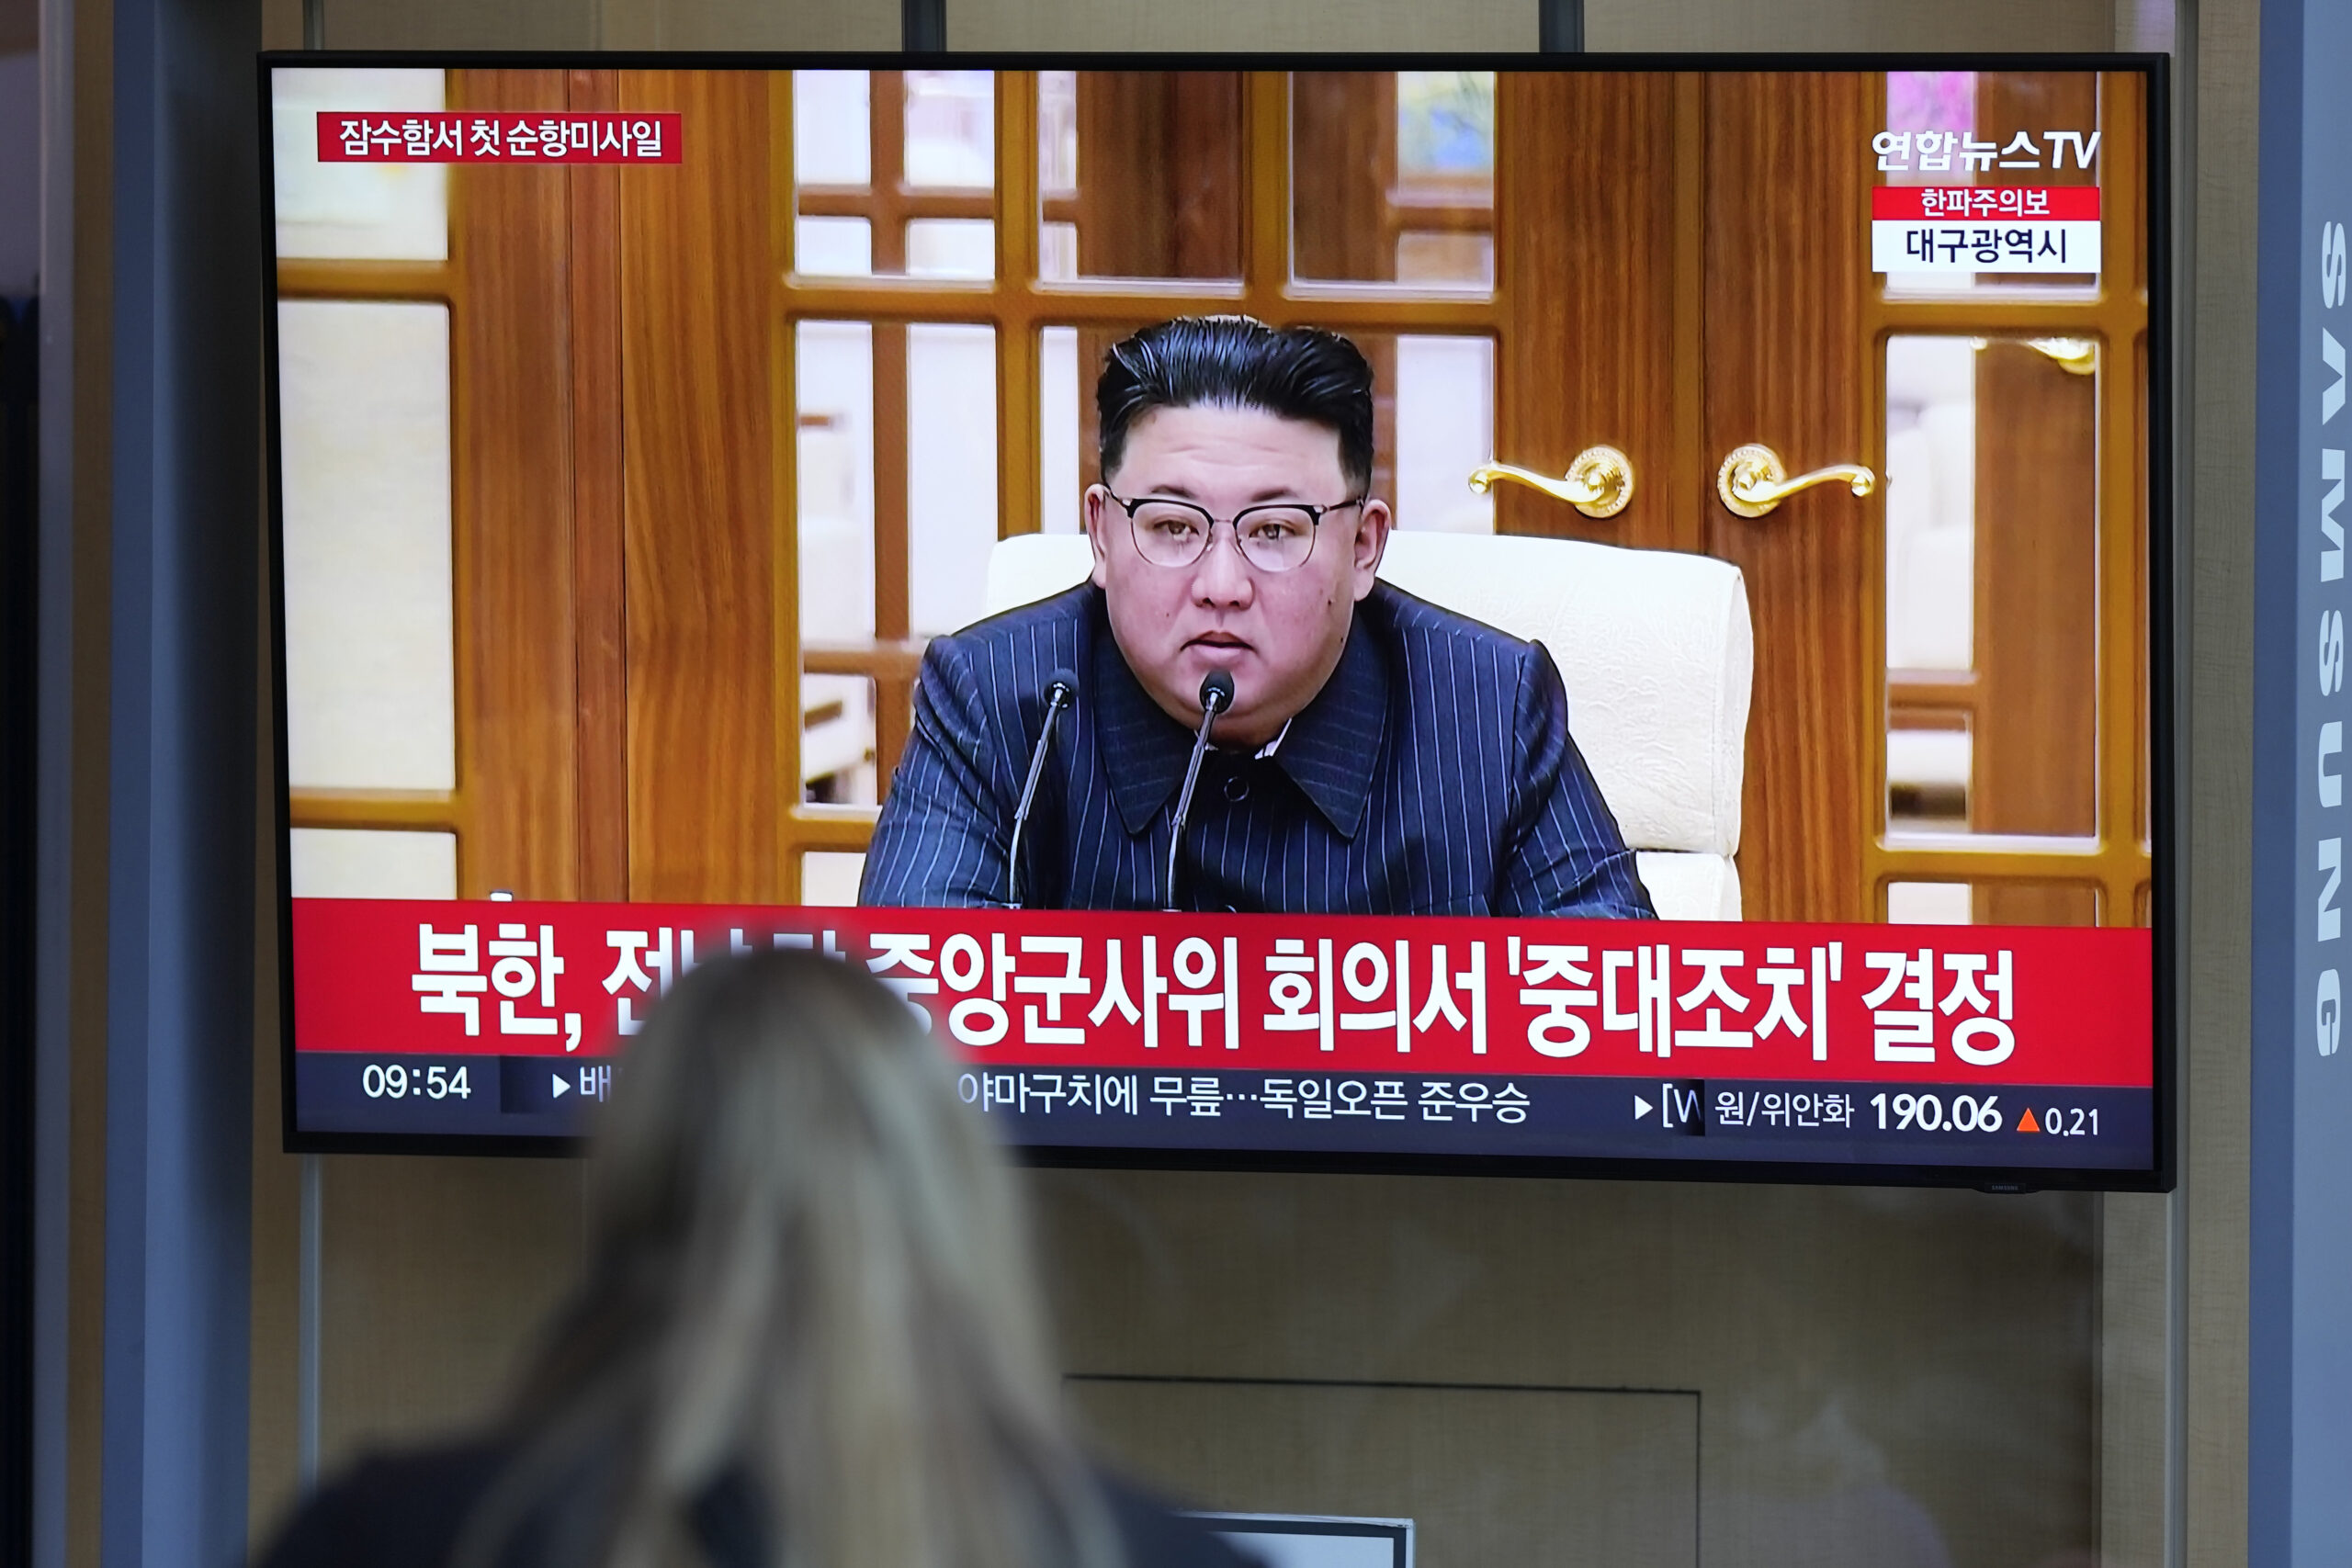 FILE - A TV screen shows an image of North Korean leader Kim Jong Un during a news program at the S...